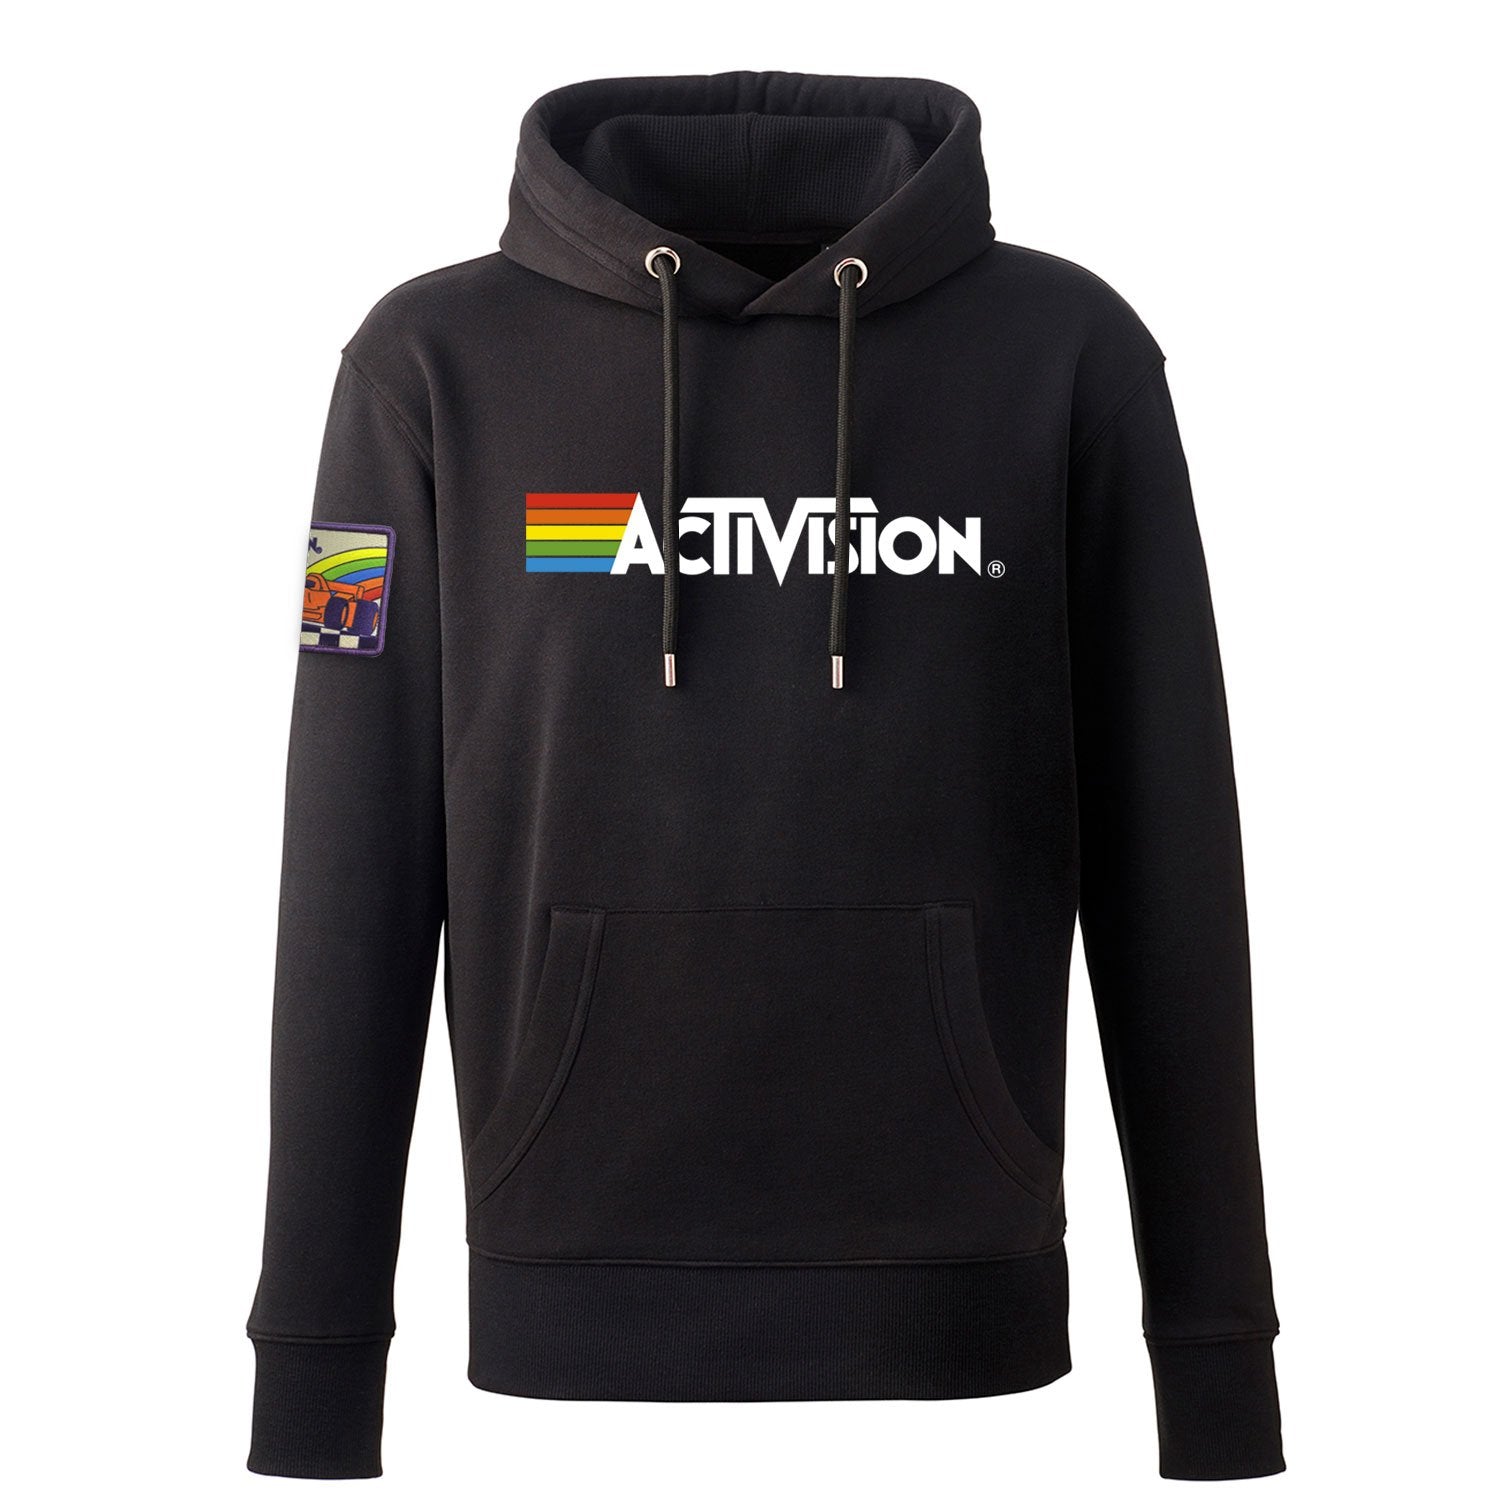 Grand Prix Patch, Activision Logo Men's Hoody, Black Pullover in Unisex Fit with Kangaroo Pocket